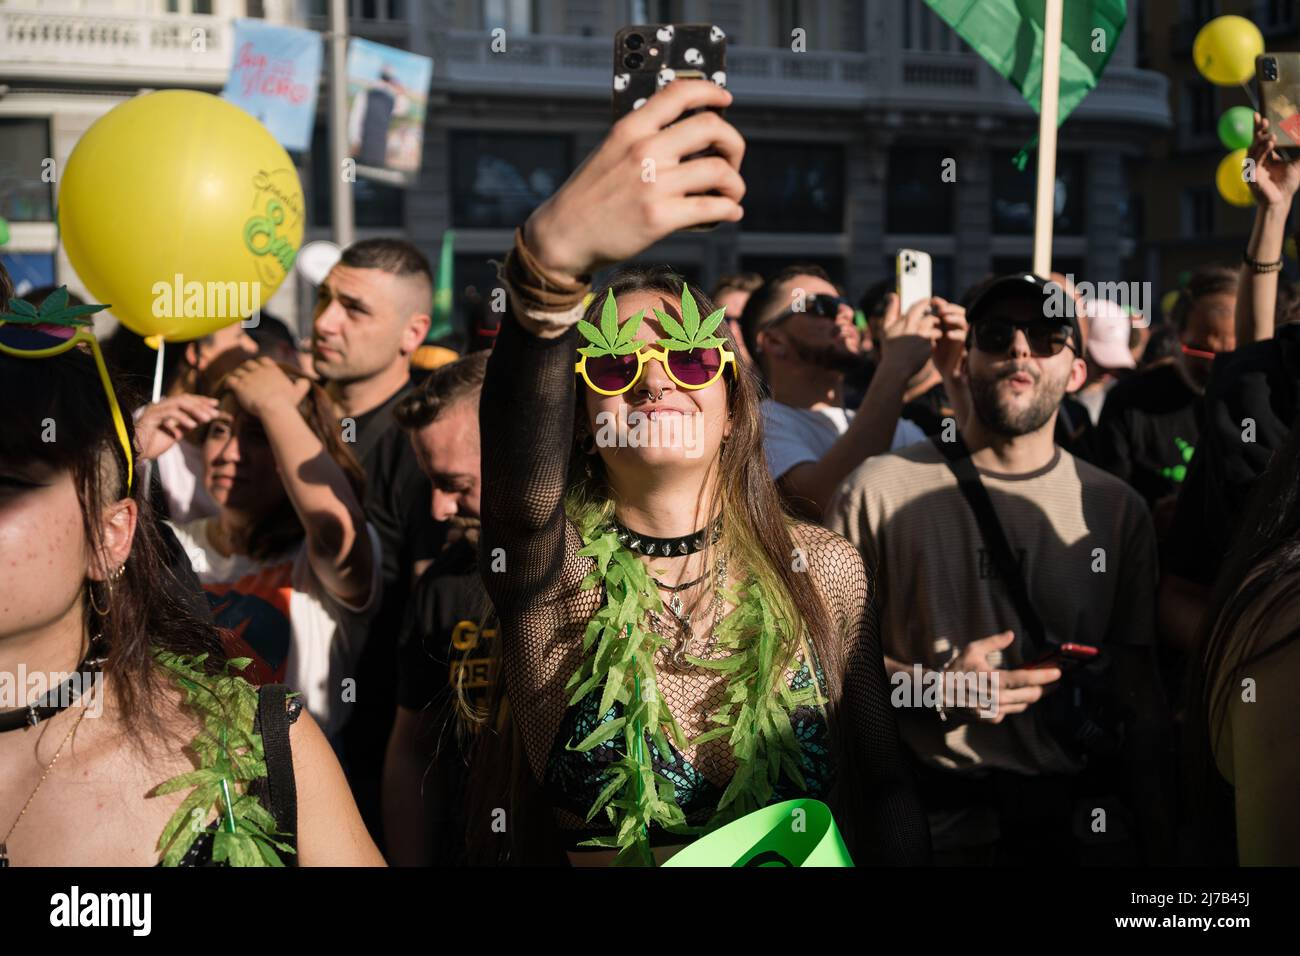 Pro-cannabis protesters in marijuana suits seen during the demonstration. Thousands of pro-cannabis activists took part in a demonstration in La Gran Via in Madrid, Spain, in favor of legalizing the medicinal and recreational use of marijuana. (Photo by Diego Radames / SOPA Images/Sipa USA) Stock Photo